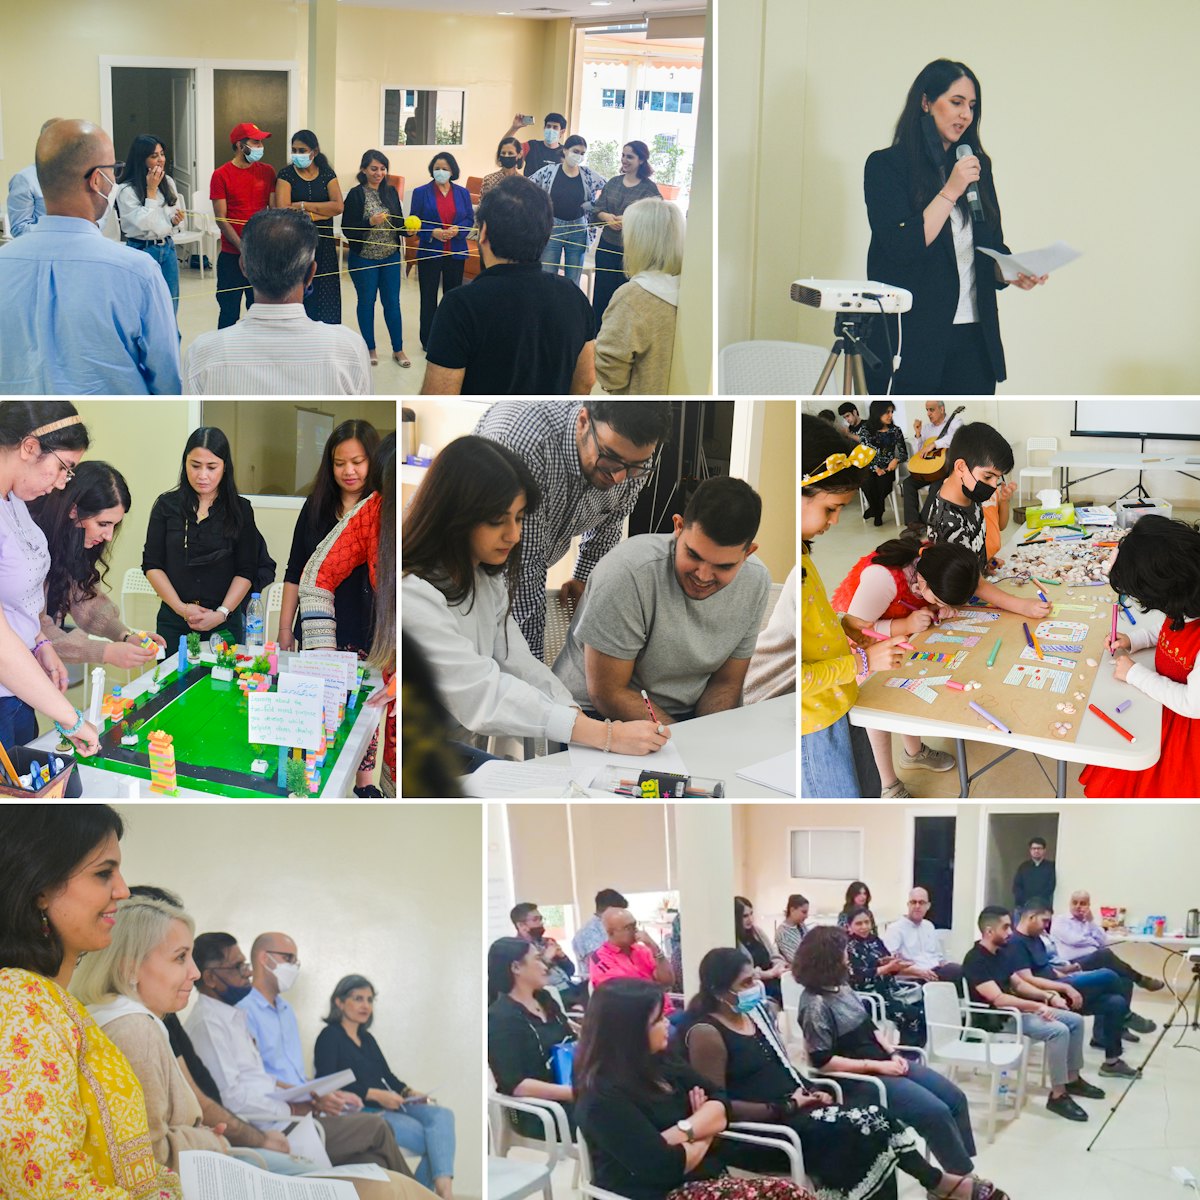 A conference held in Ajman, United Arab Emirates, focused on the role of youth in contributing to social transformation. Participants highlighted that Bahá’í initiatives at the grassroots are developing the capacity of youth to resist negative social forces and direct their energies toward the common good.